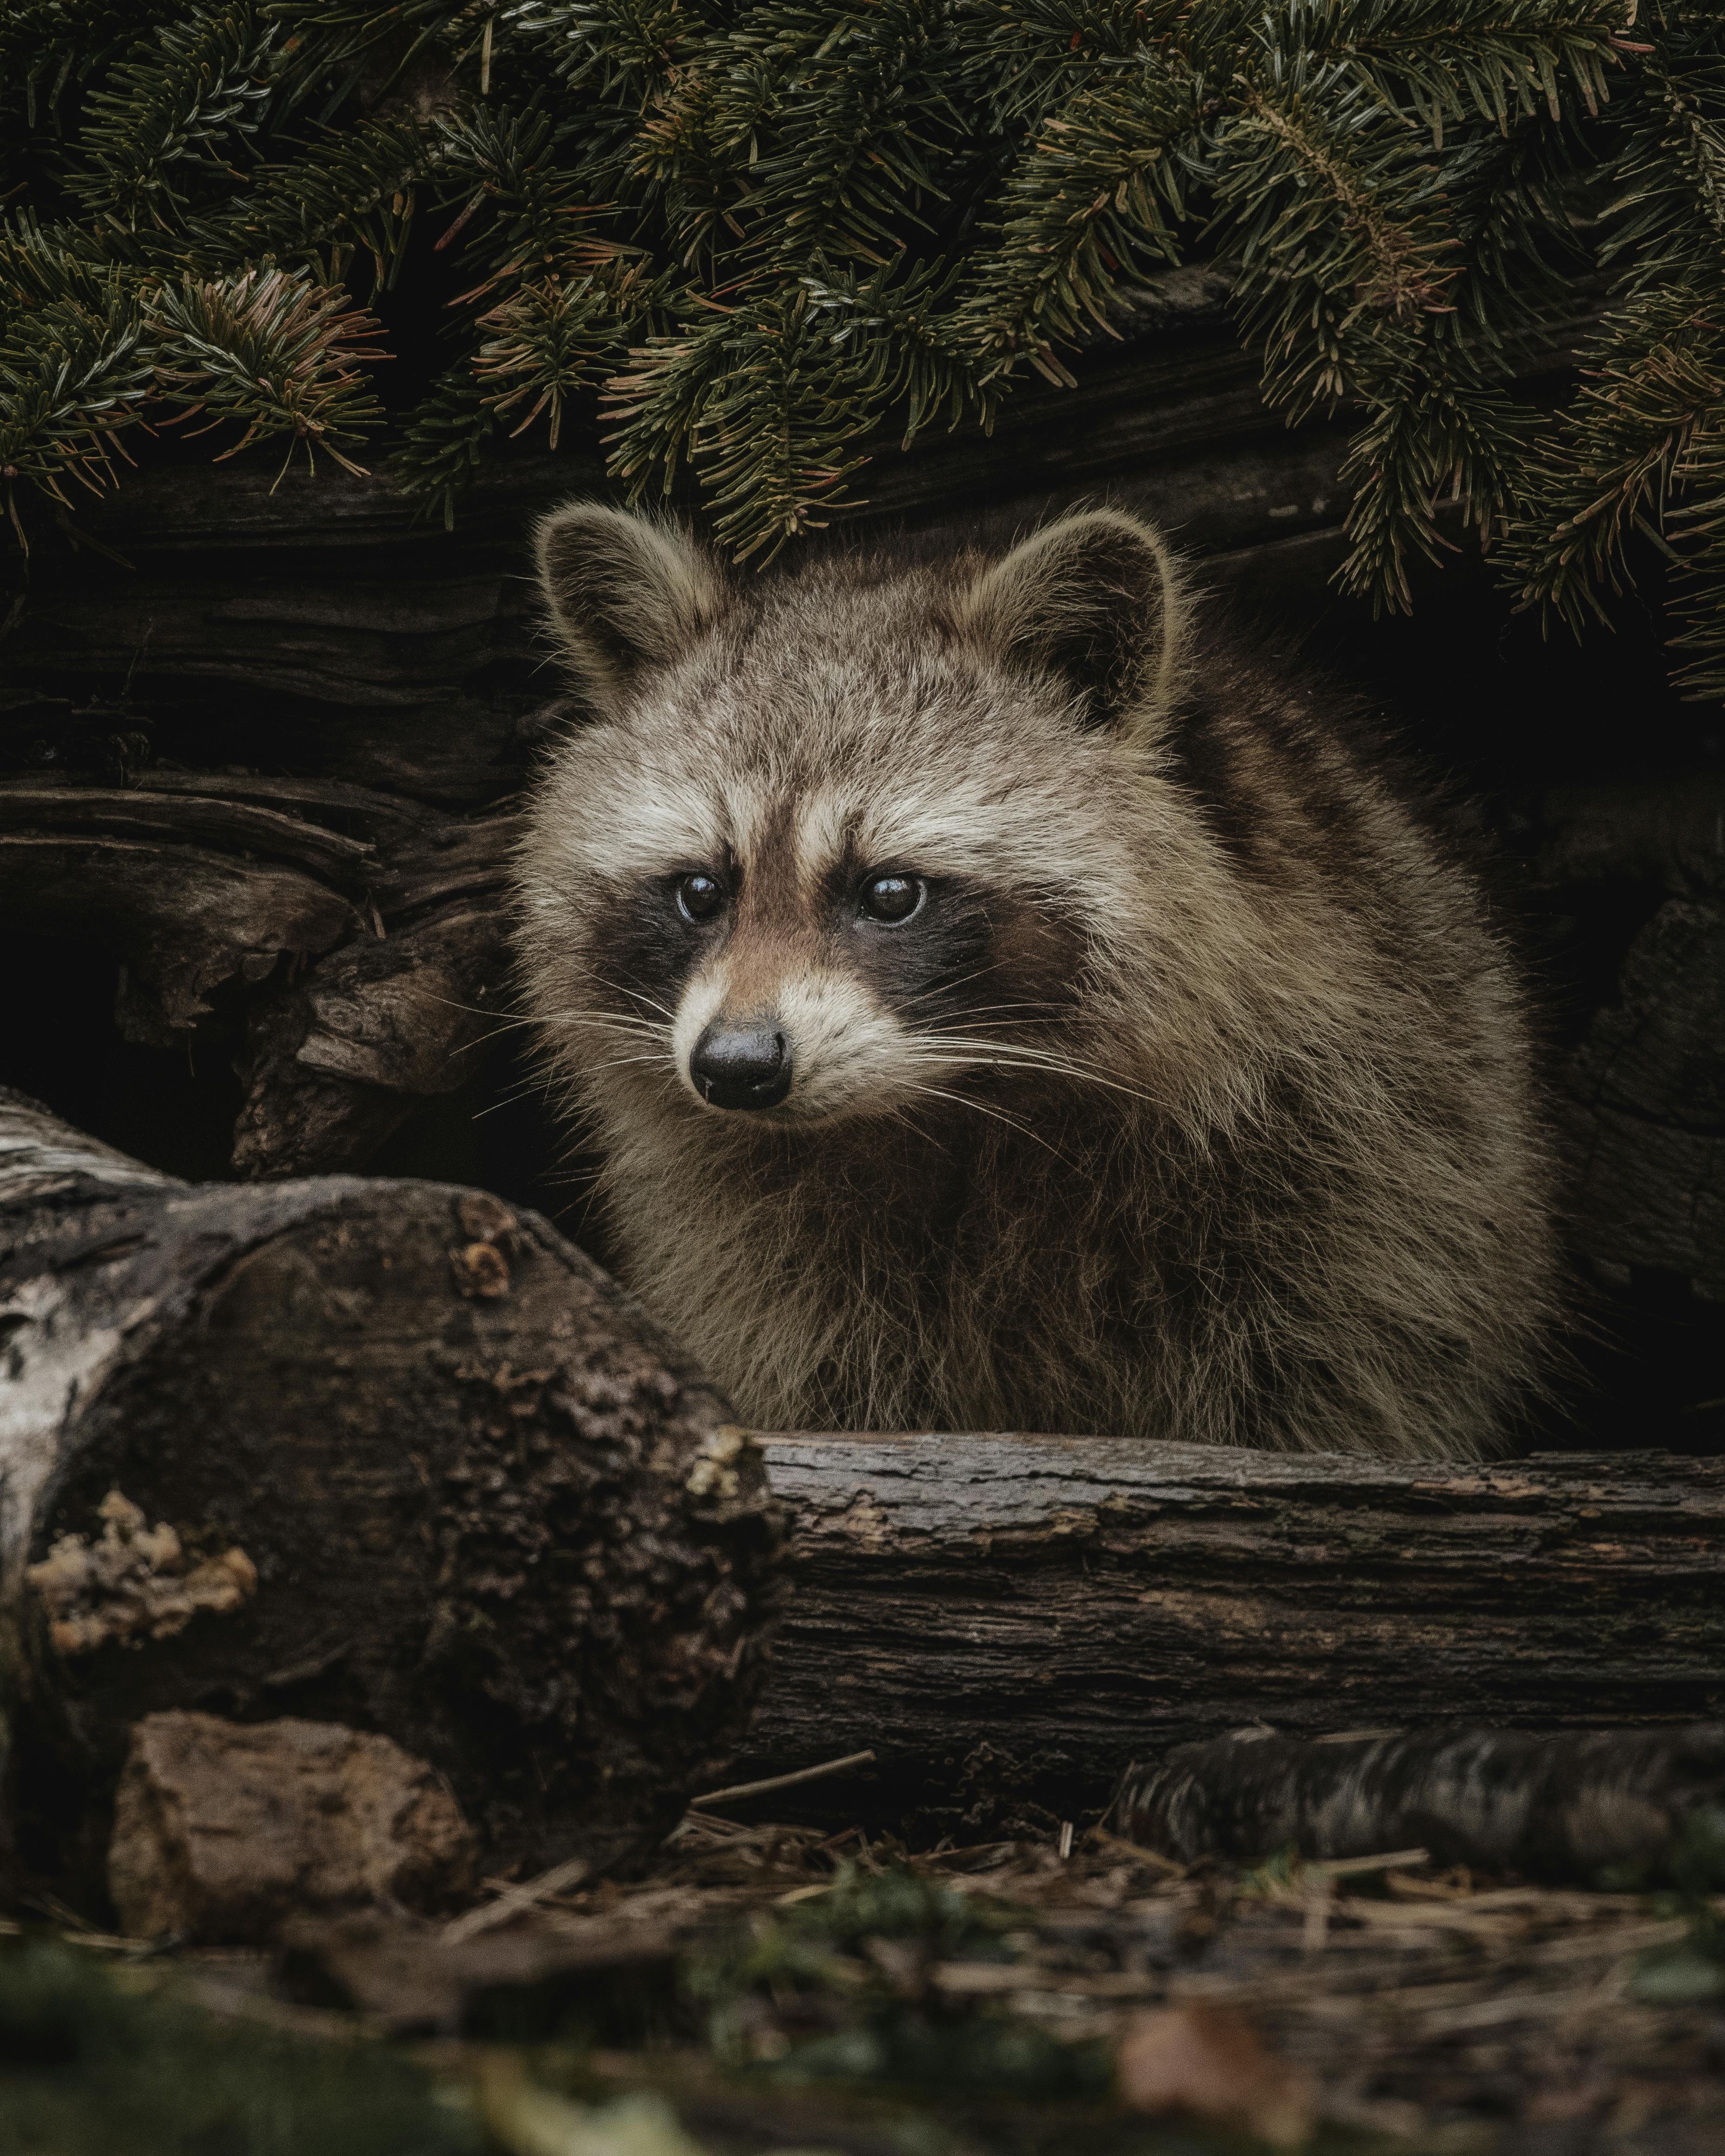 1+ Thousand Caged Raccoon Royalty-Free Images, Stock Photos